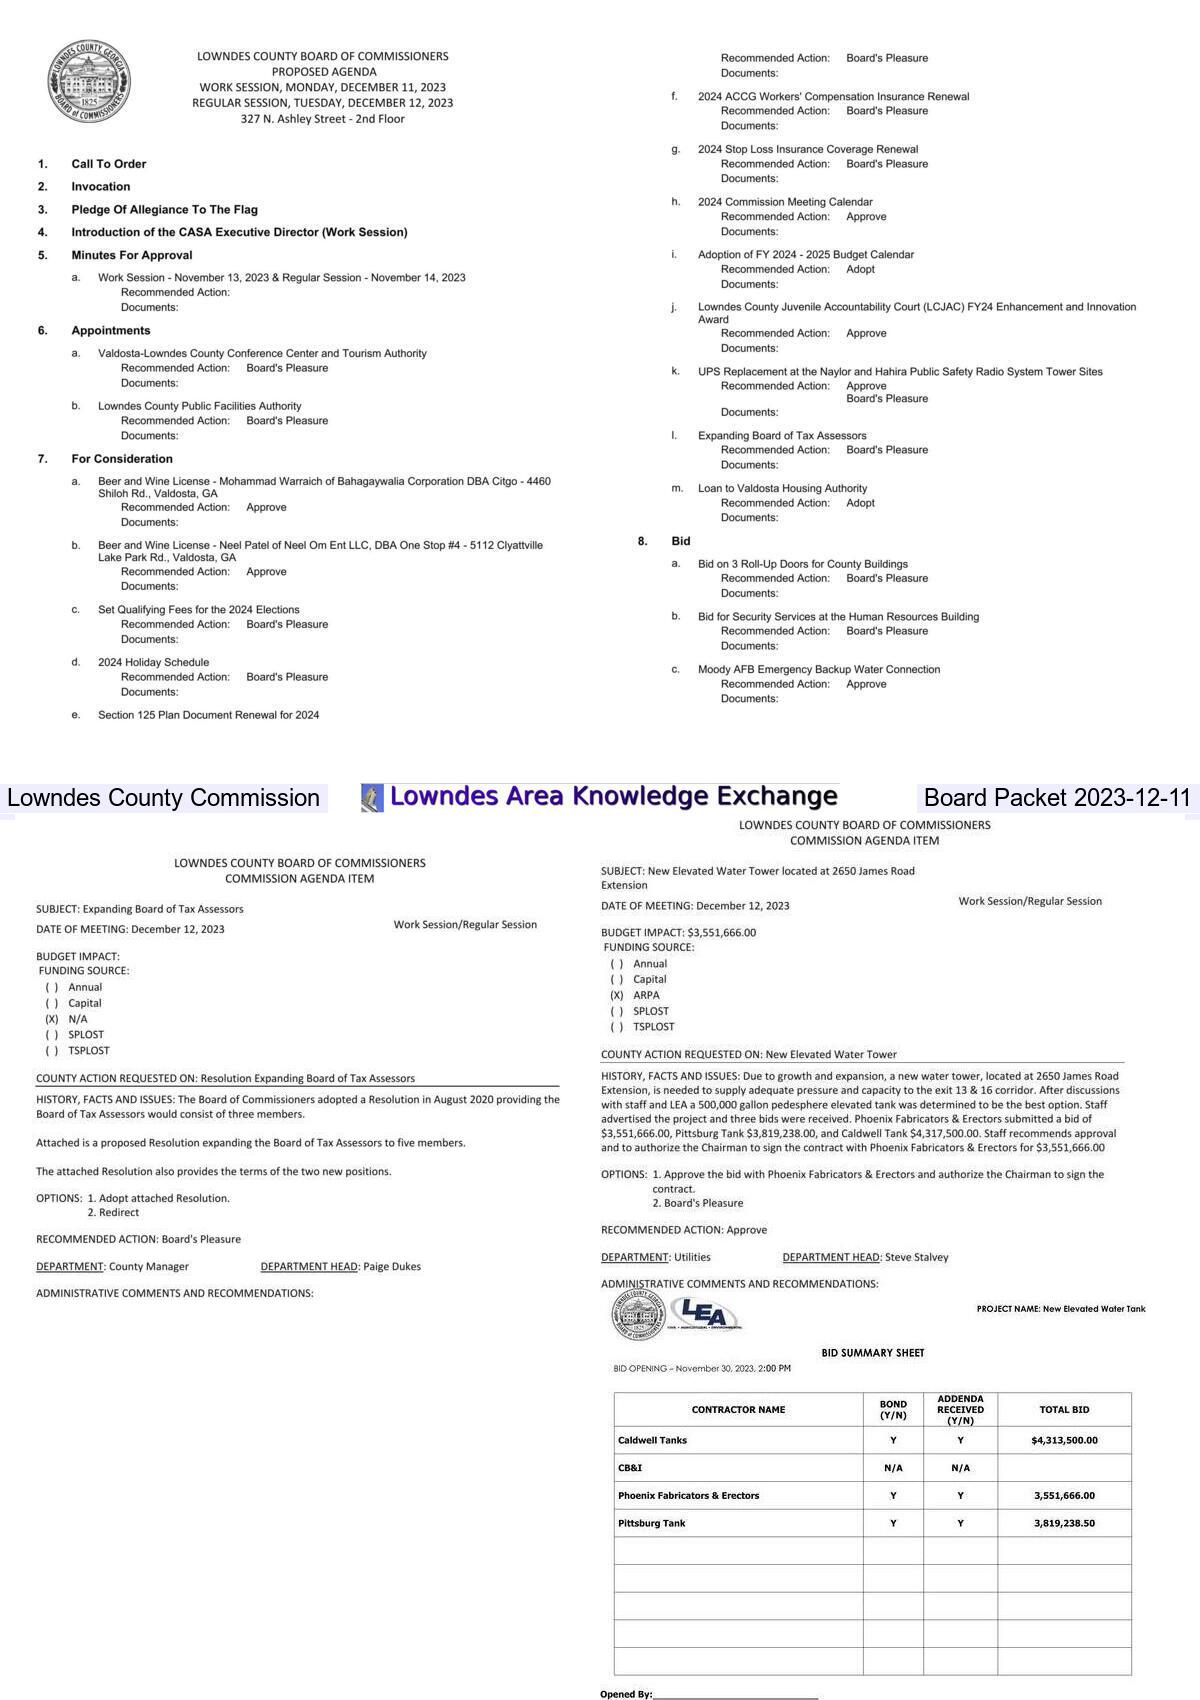 Collage, LCC Packet, 2023-12-11